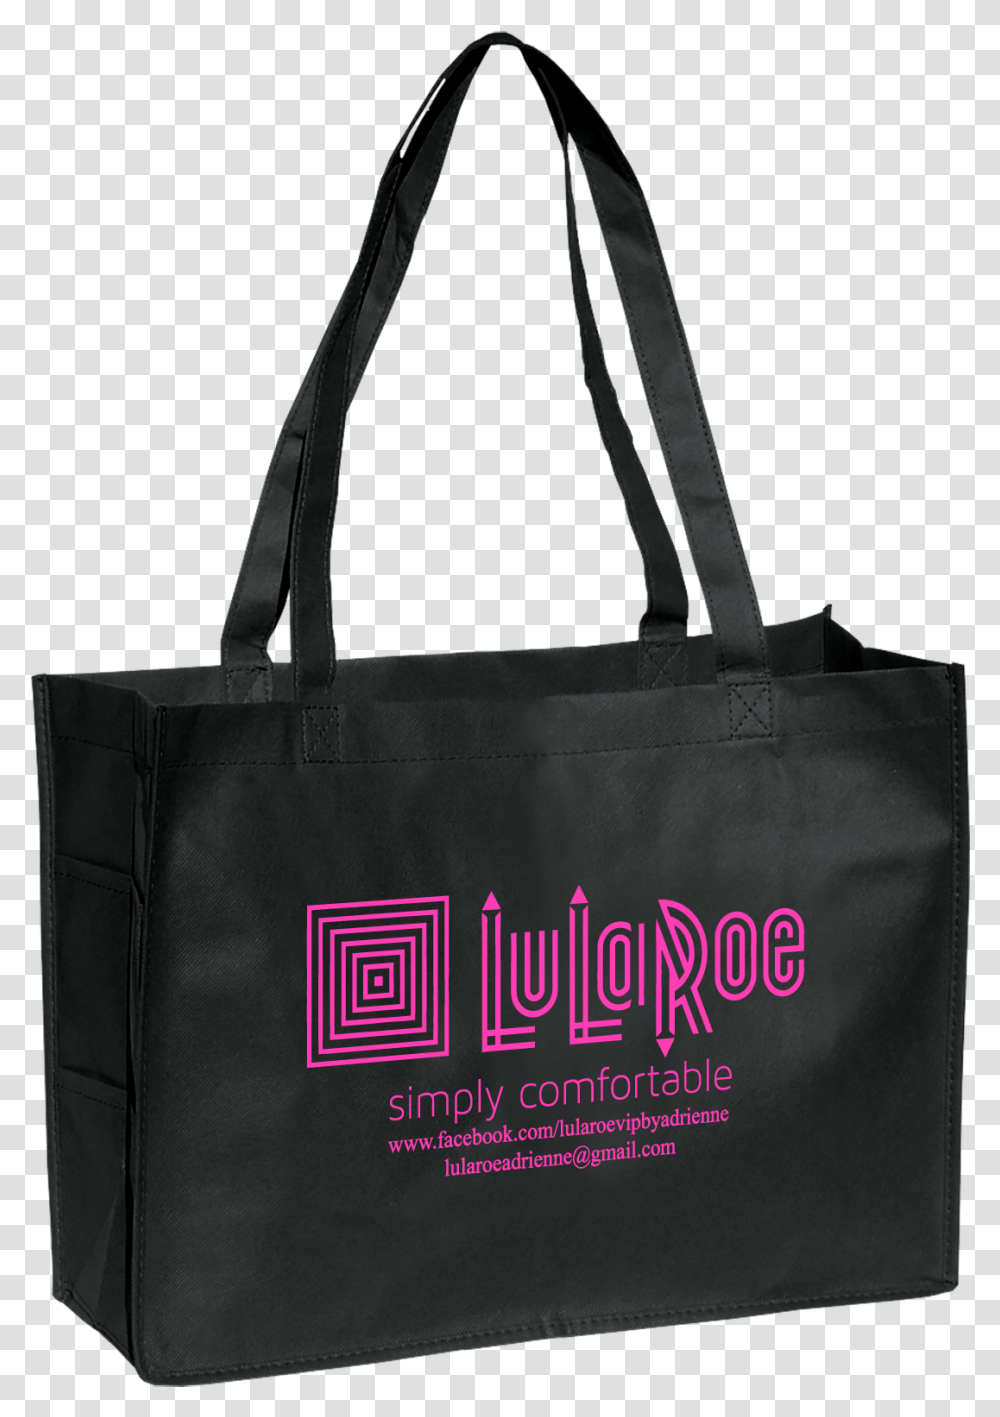 By Adrienne Convention Tote Bags Tote Bag, Handbag, Accessories, Accessory, Shopping Bag Transparent Png